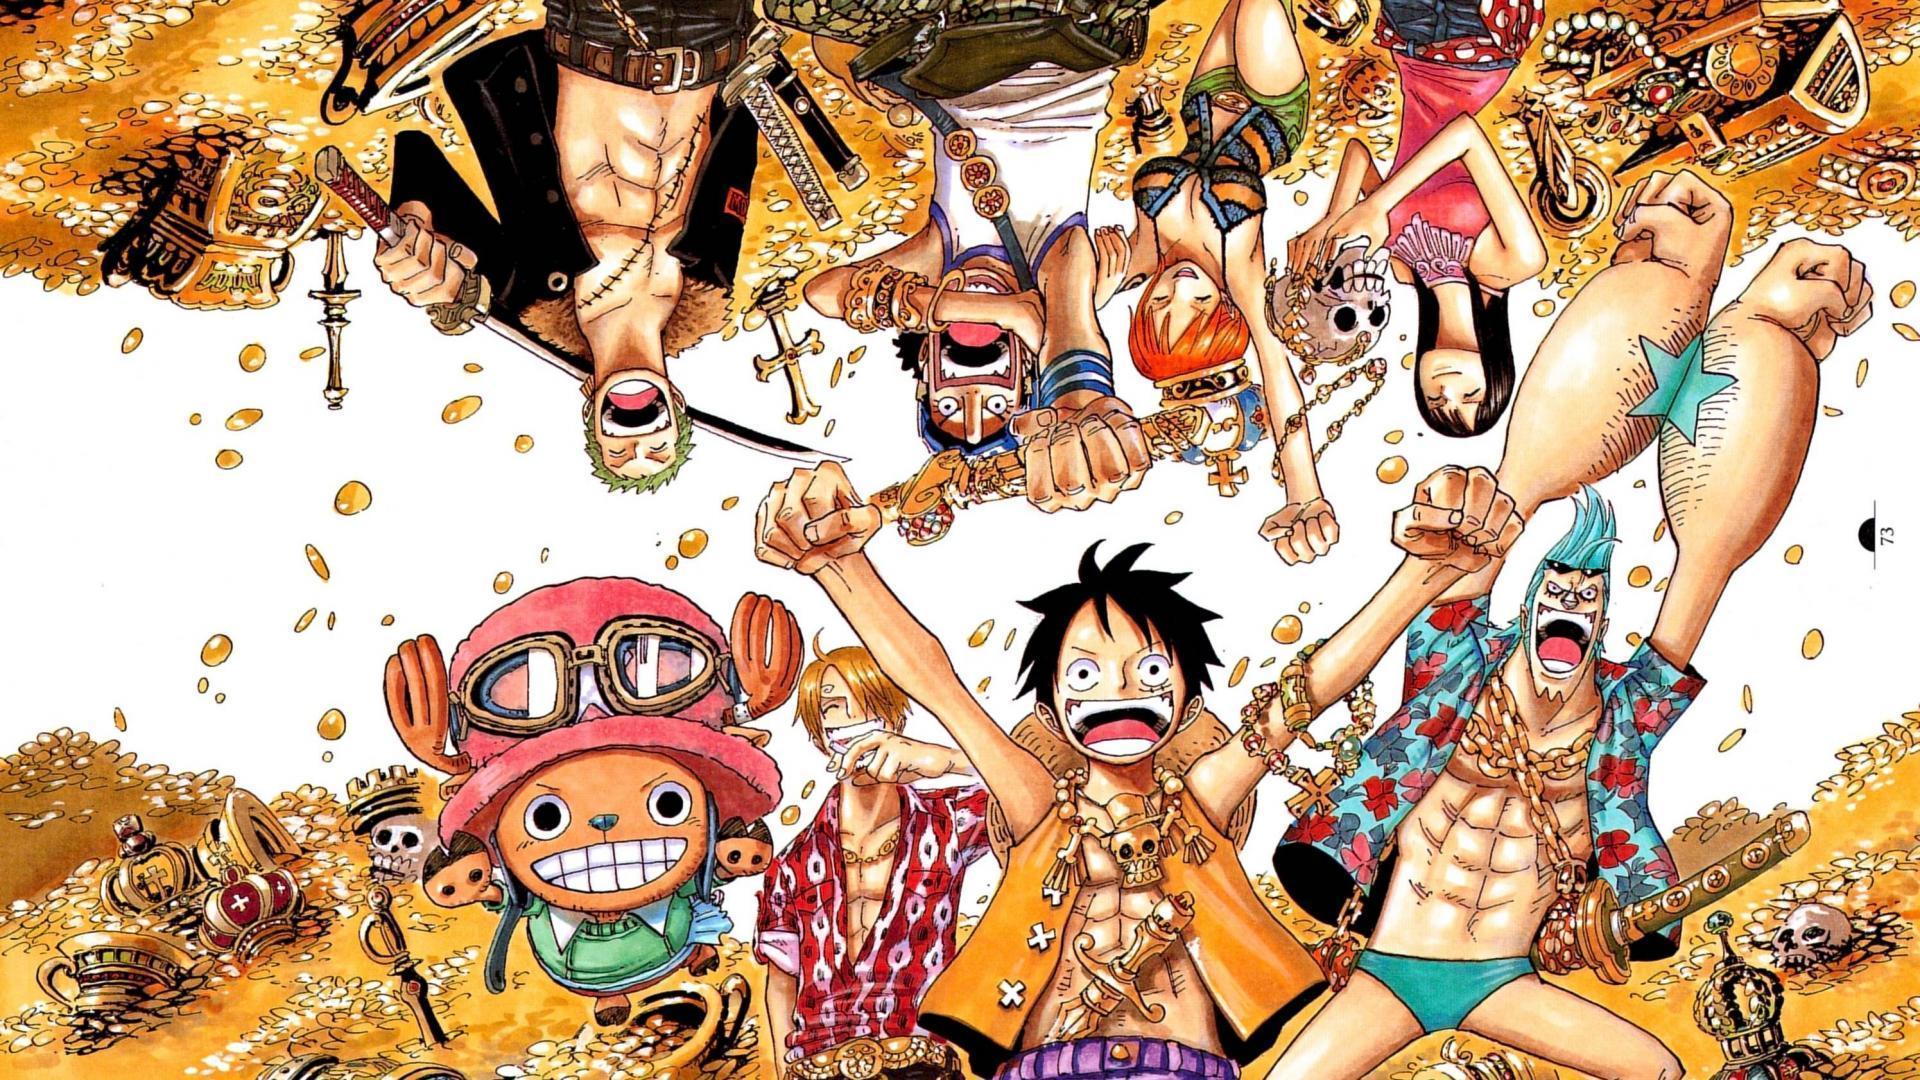 image For > One Piece Wallpaper 1920x1080